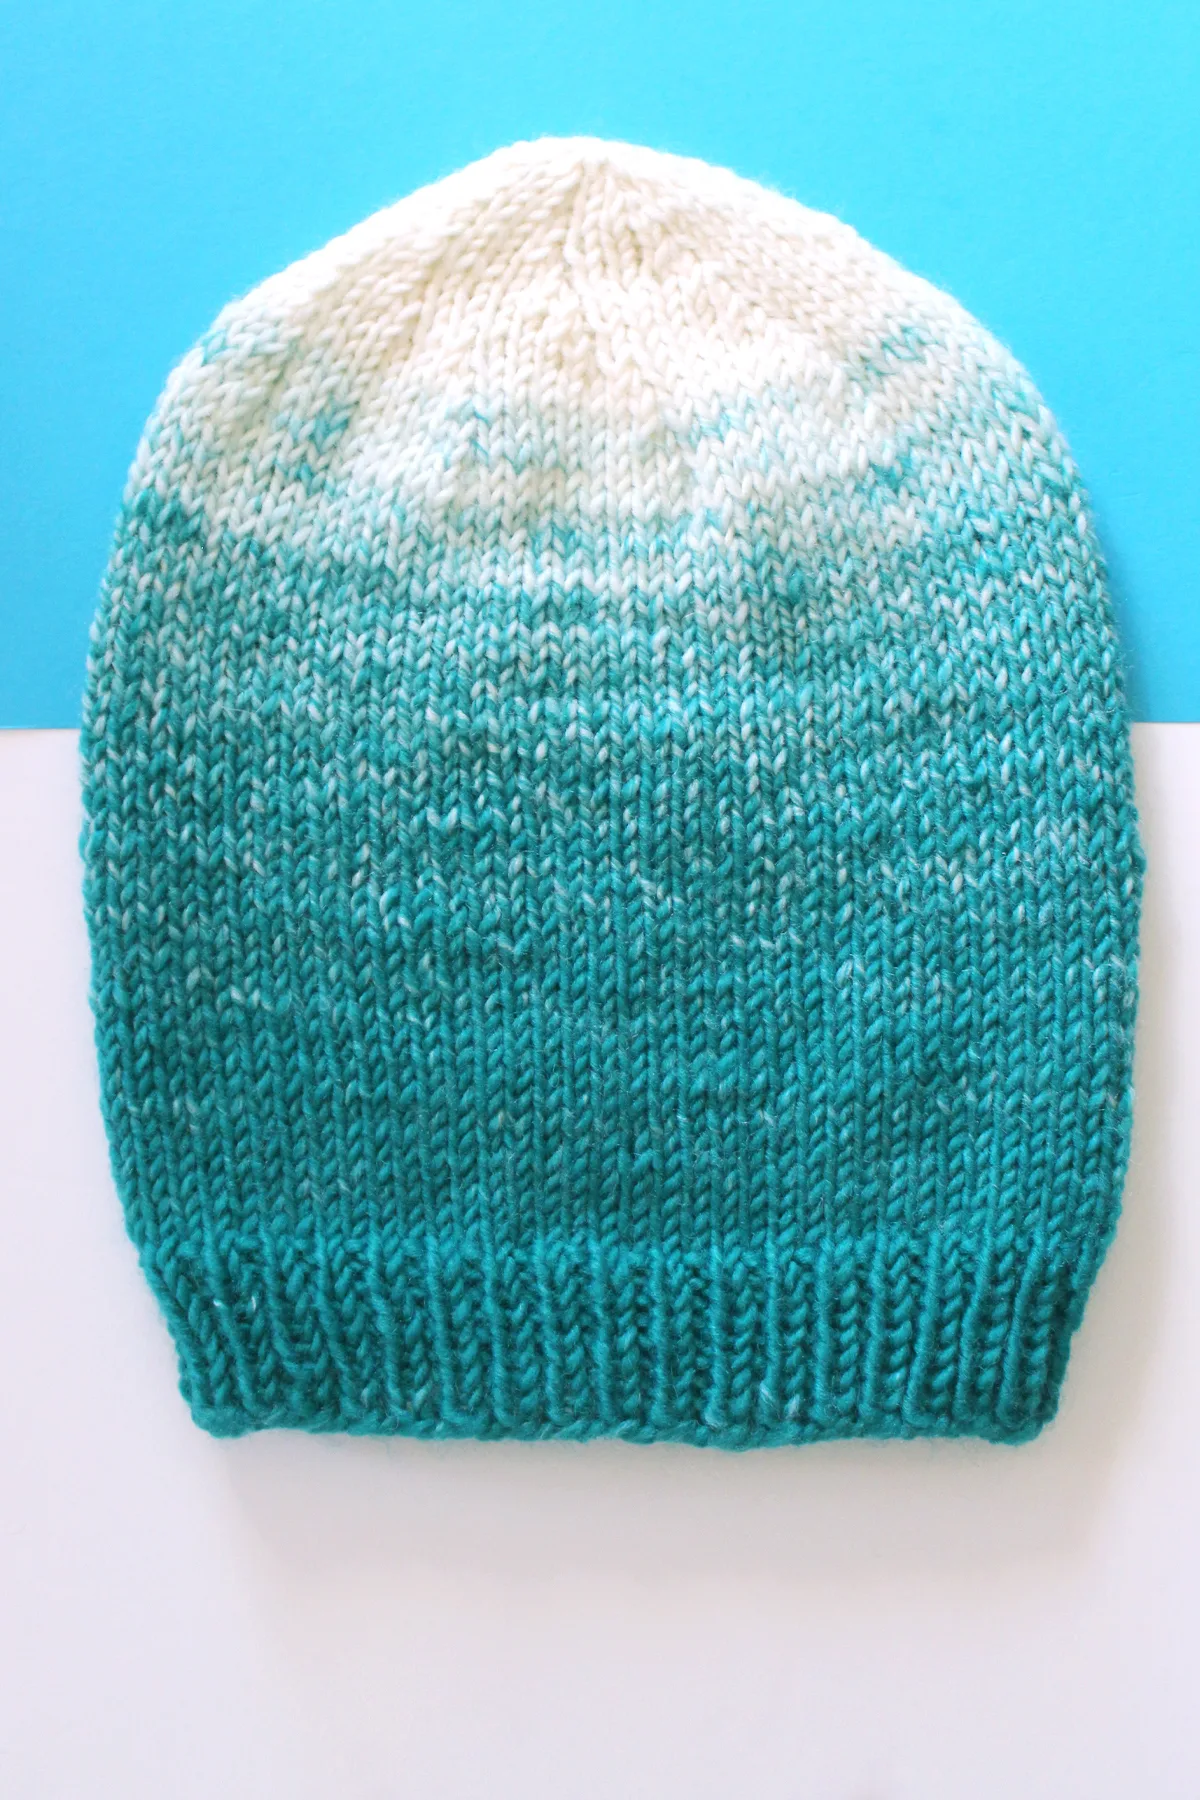 Slouchy Beanie knitted in blue to white ombre yarn colors.